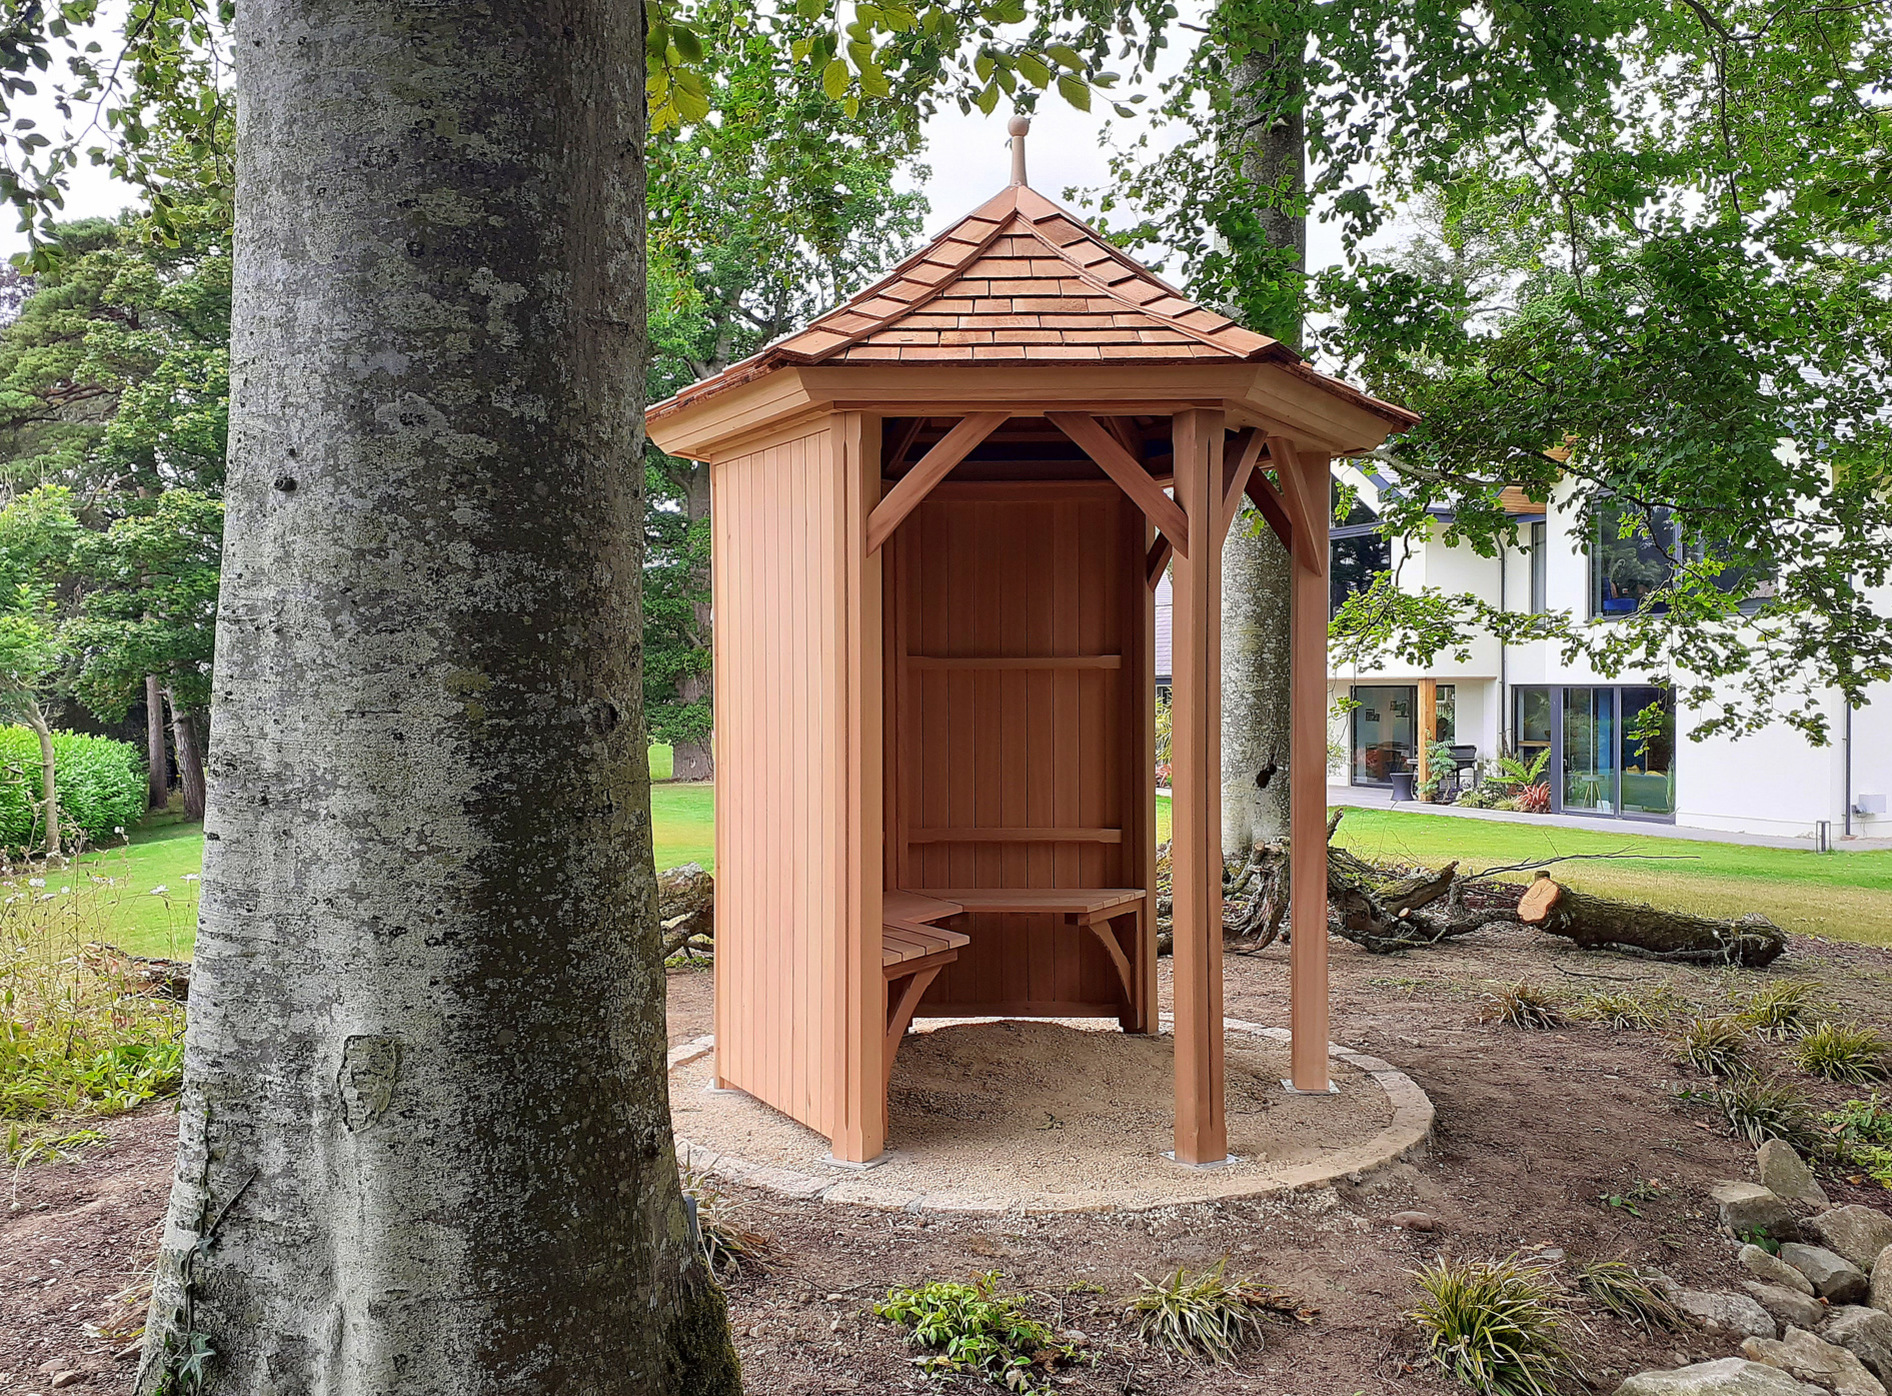 A stunning 1.8m six-sided Garden Gazebo by Victorian Garden Buildings, exceptionally well made in Western Red Cedar, with optional cedar bench. Supplied + Fitted by Owen Chubb Garden Landscapes Limited, in Maynooth, Co Kildare.